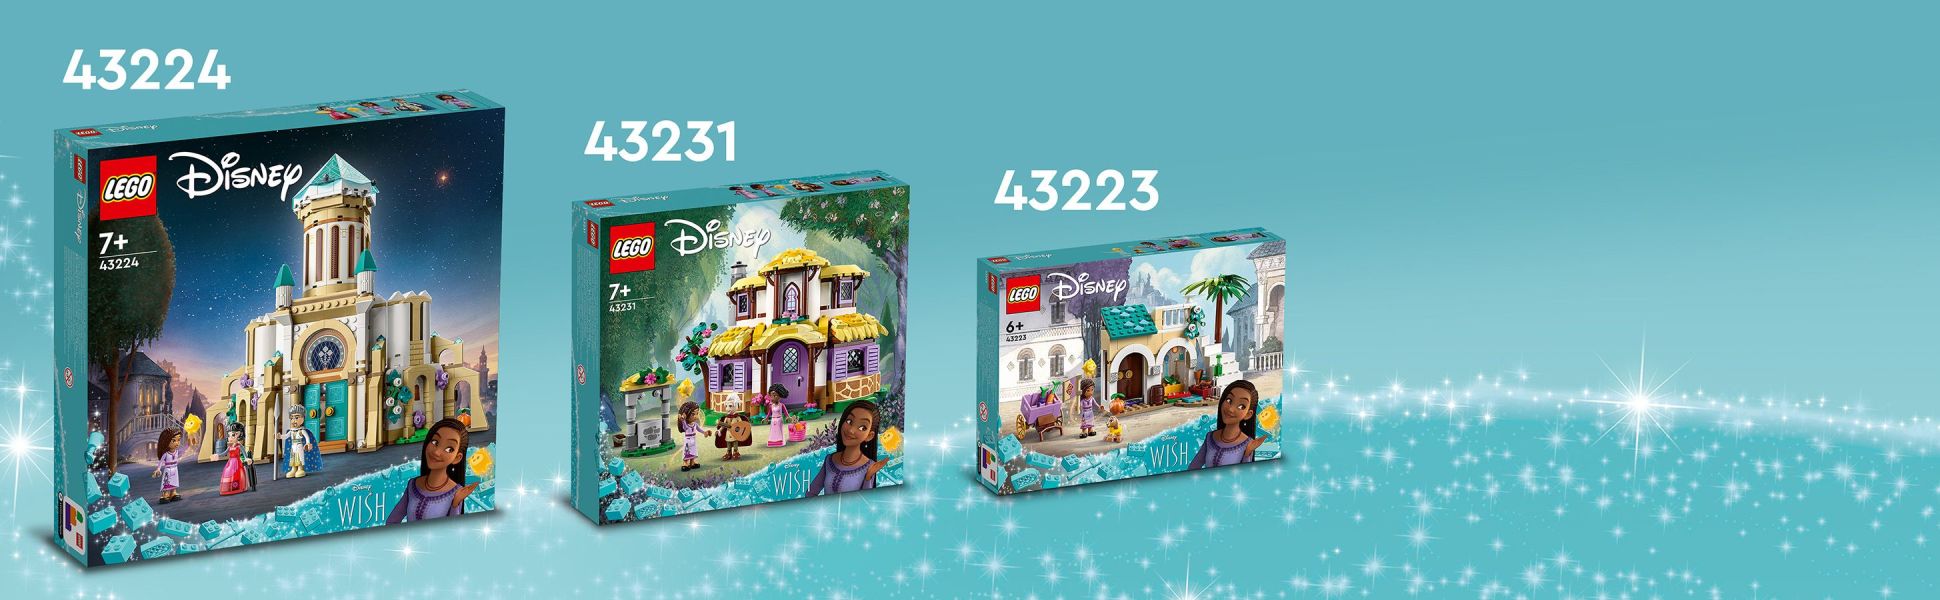 LEGO Disney Wish: Asha in the City of Rosas 43223 Building Toy Set, A  Buildable Model from the Disney Movie to Inspire Adventures and Creative  Play, A Fun Gift for Kids and